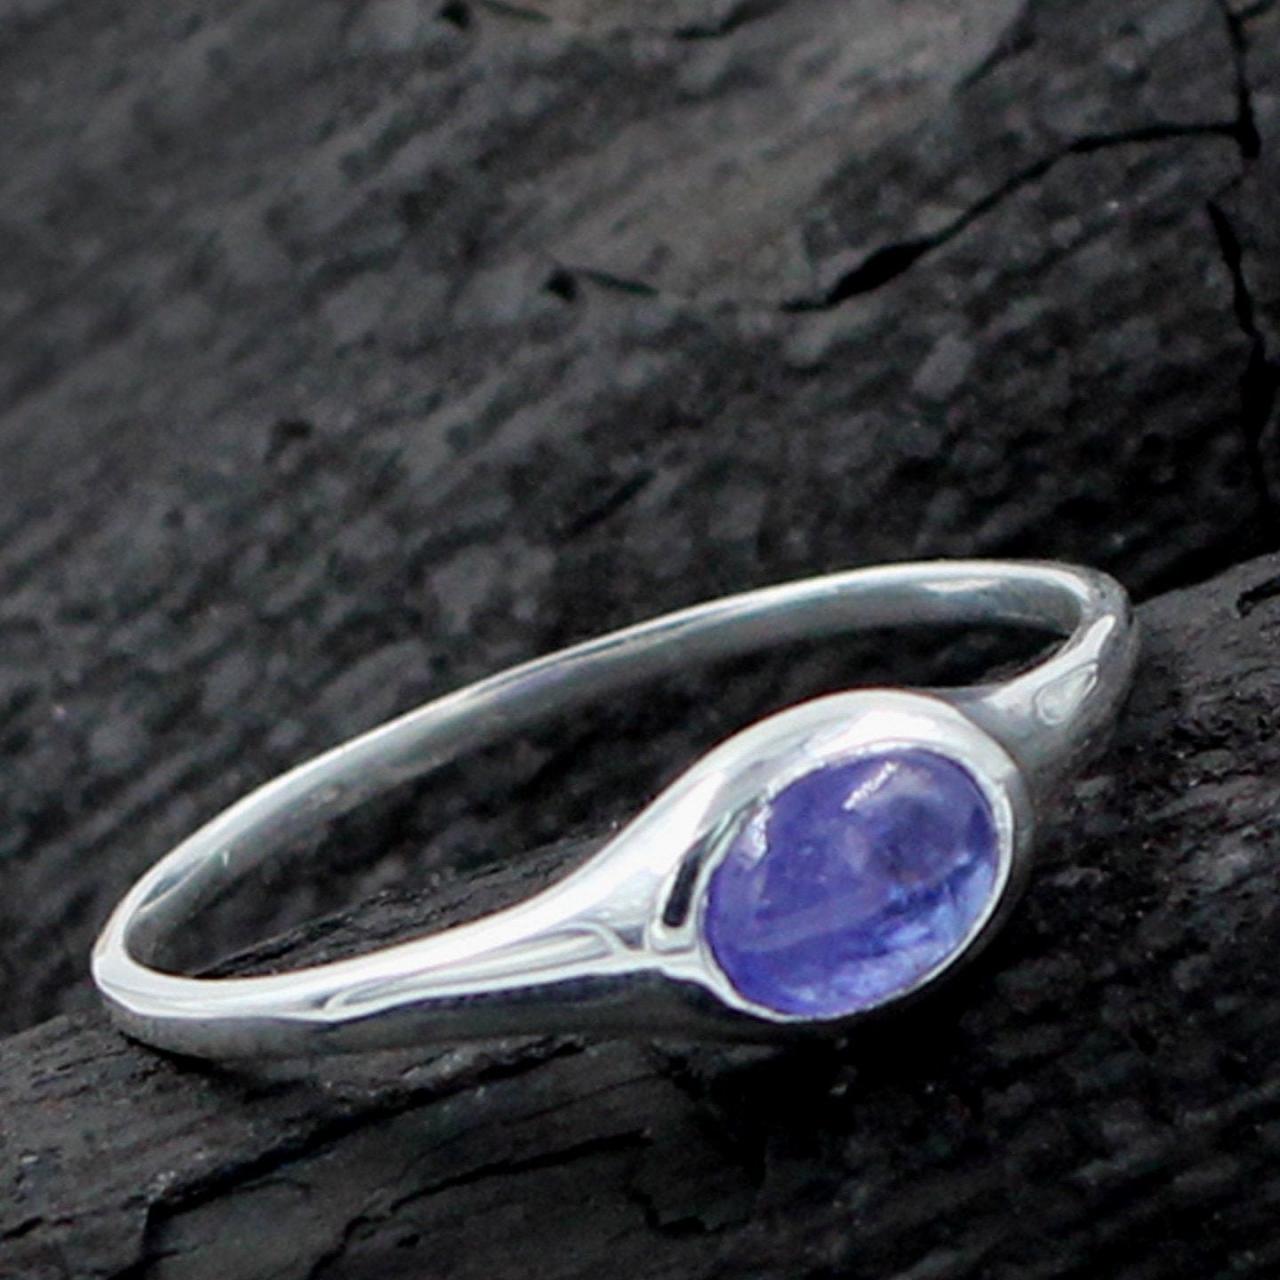 Tantalizing Tanzanite Ring,natural Gemstone Cabochon,solid 925 Sterling Silver Jewelry,anniversary Stacking Ring,solitaire Engagement Ring,